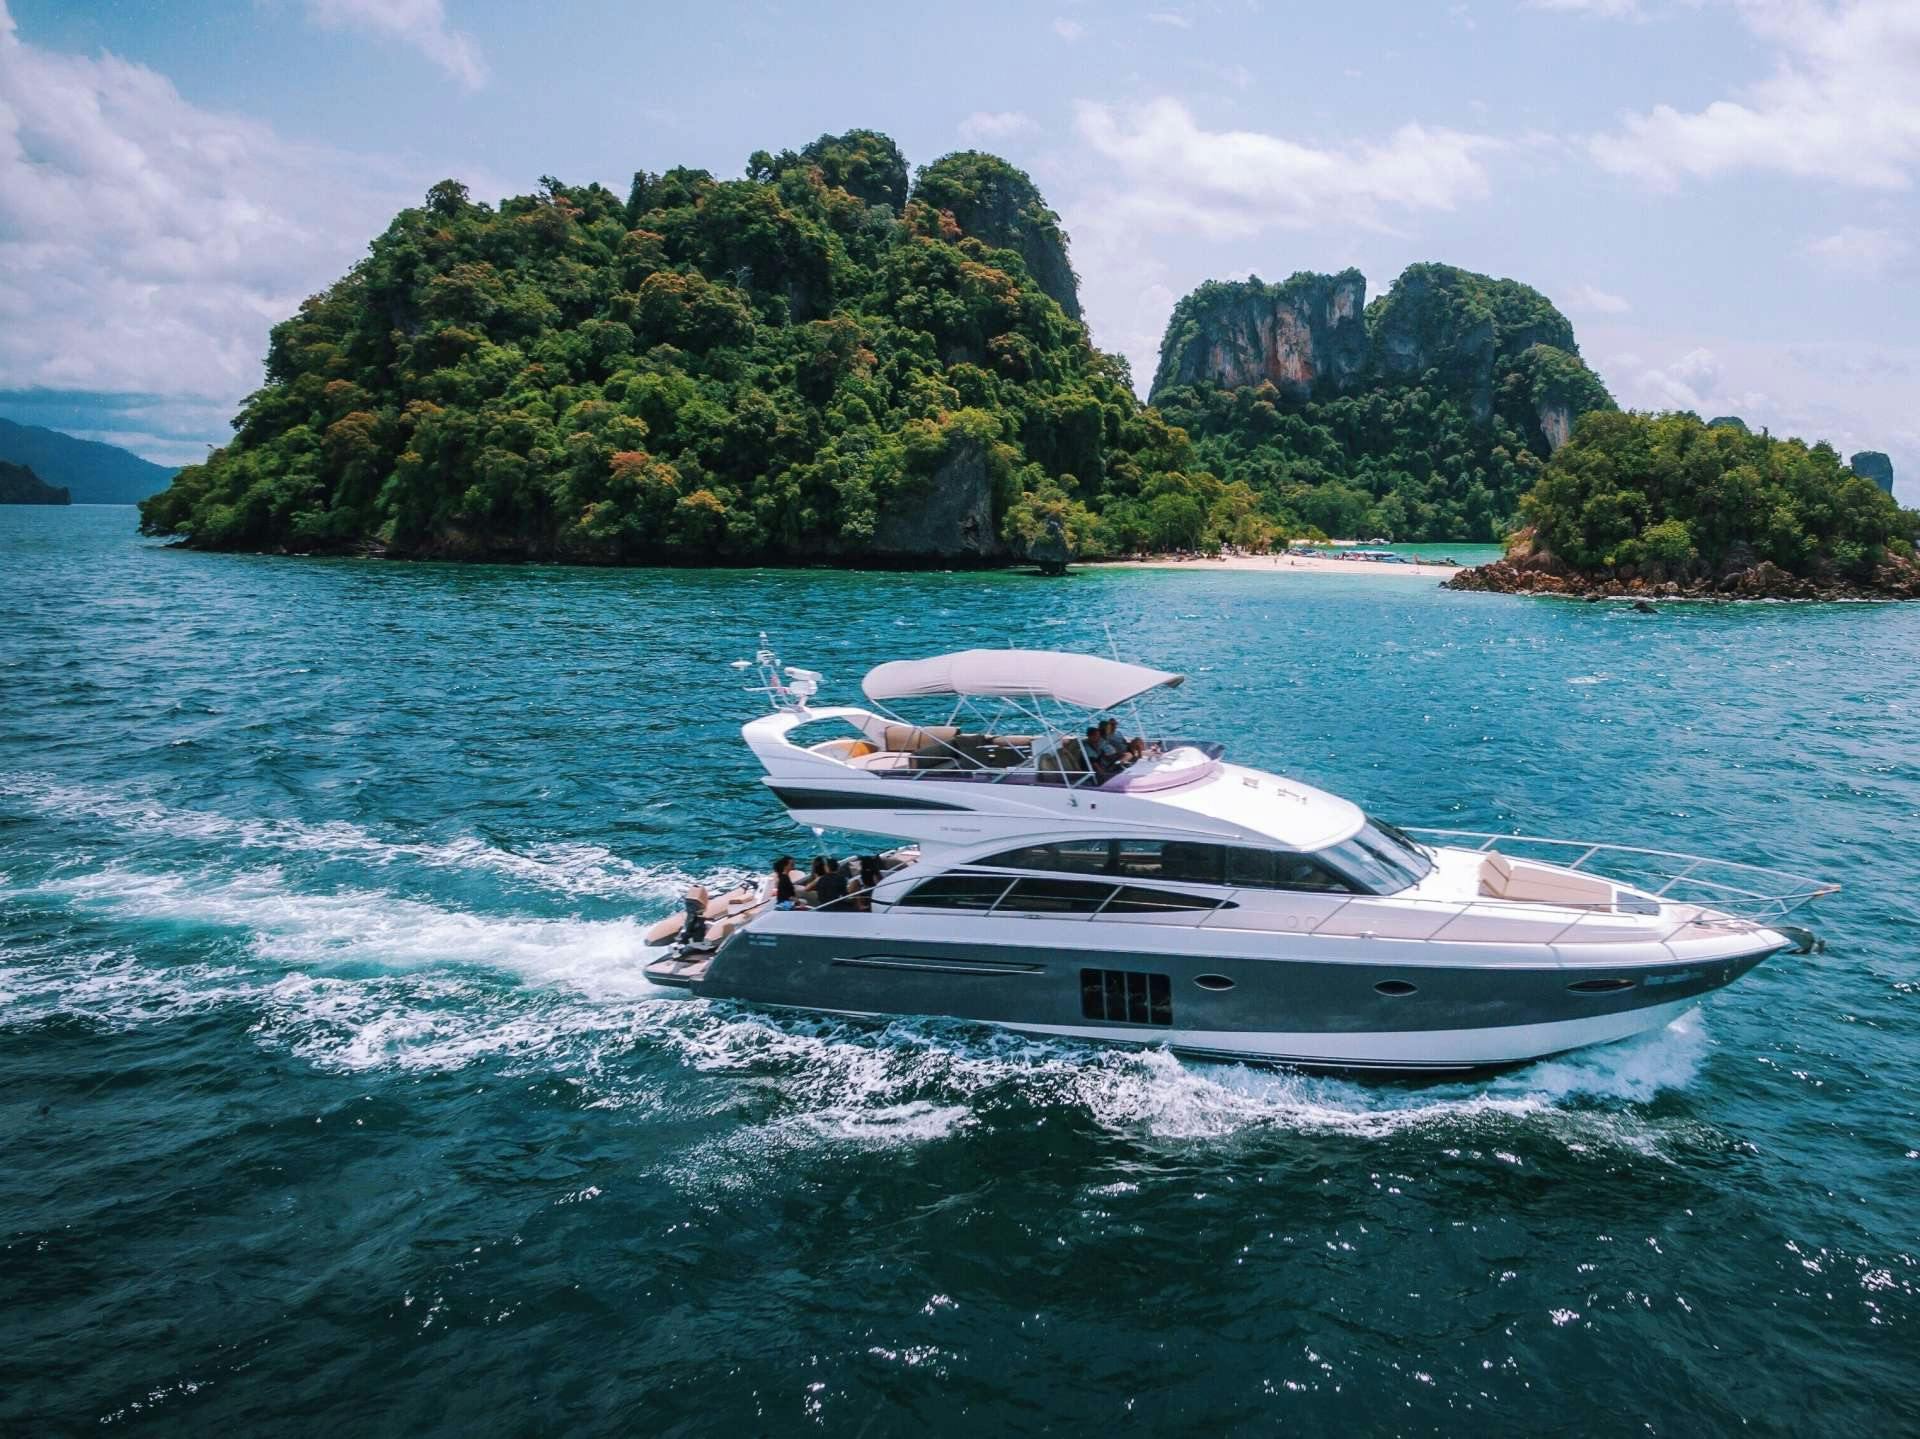 mayavee - Yacht Charter Malaysia & Boat hire in SE Asia 1